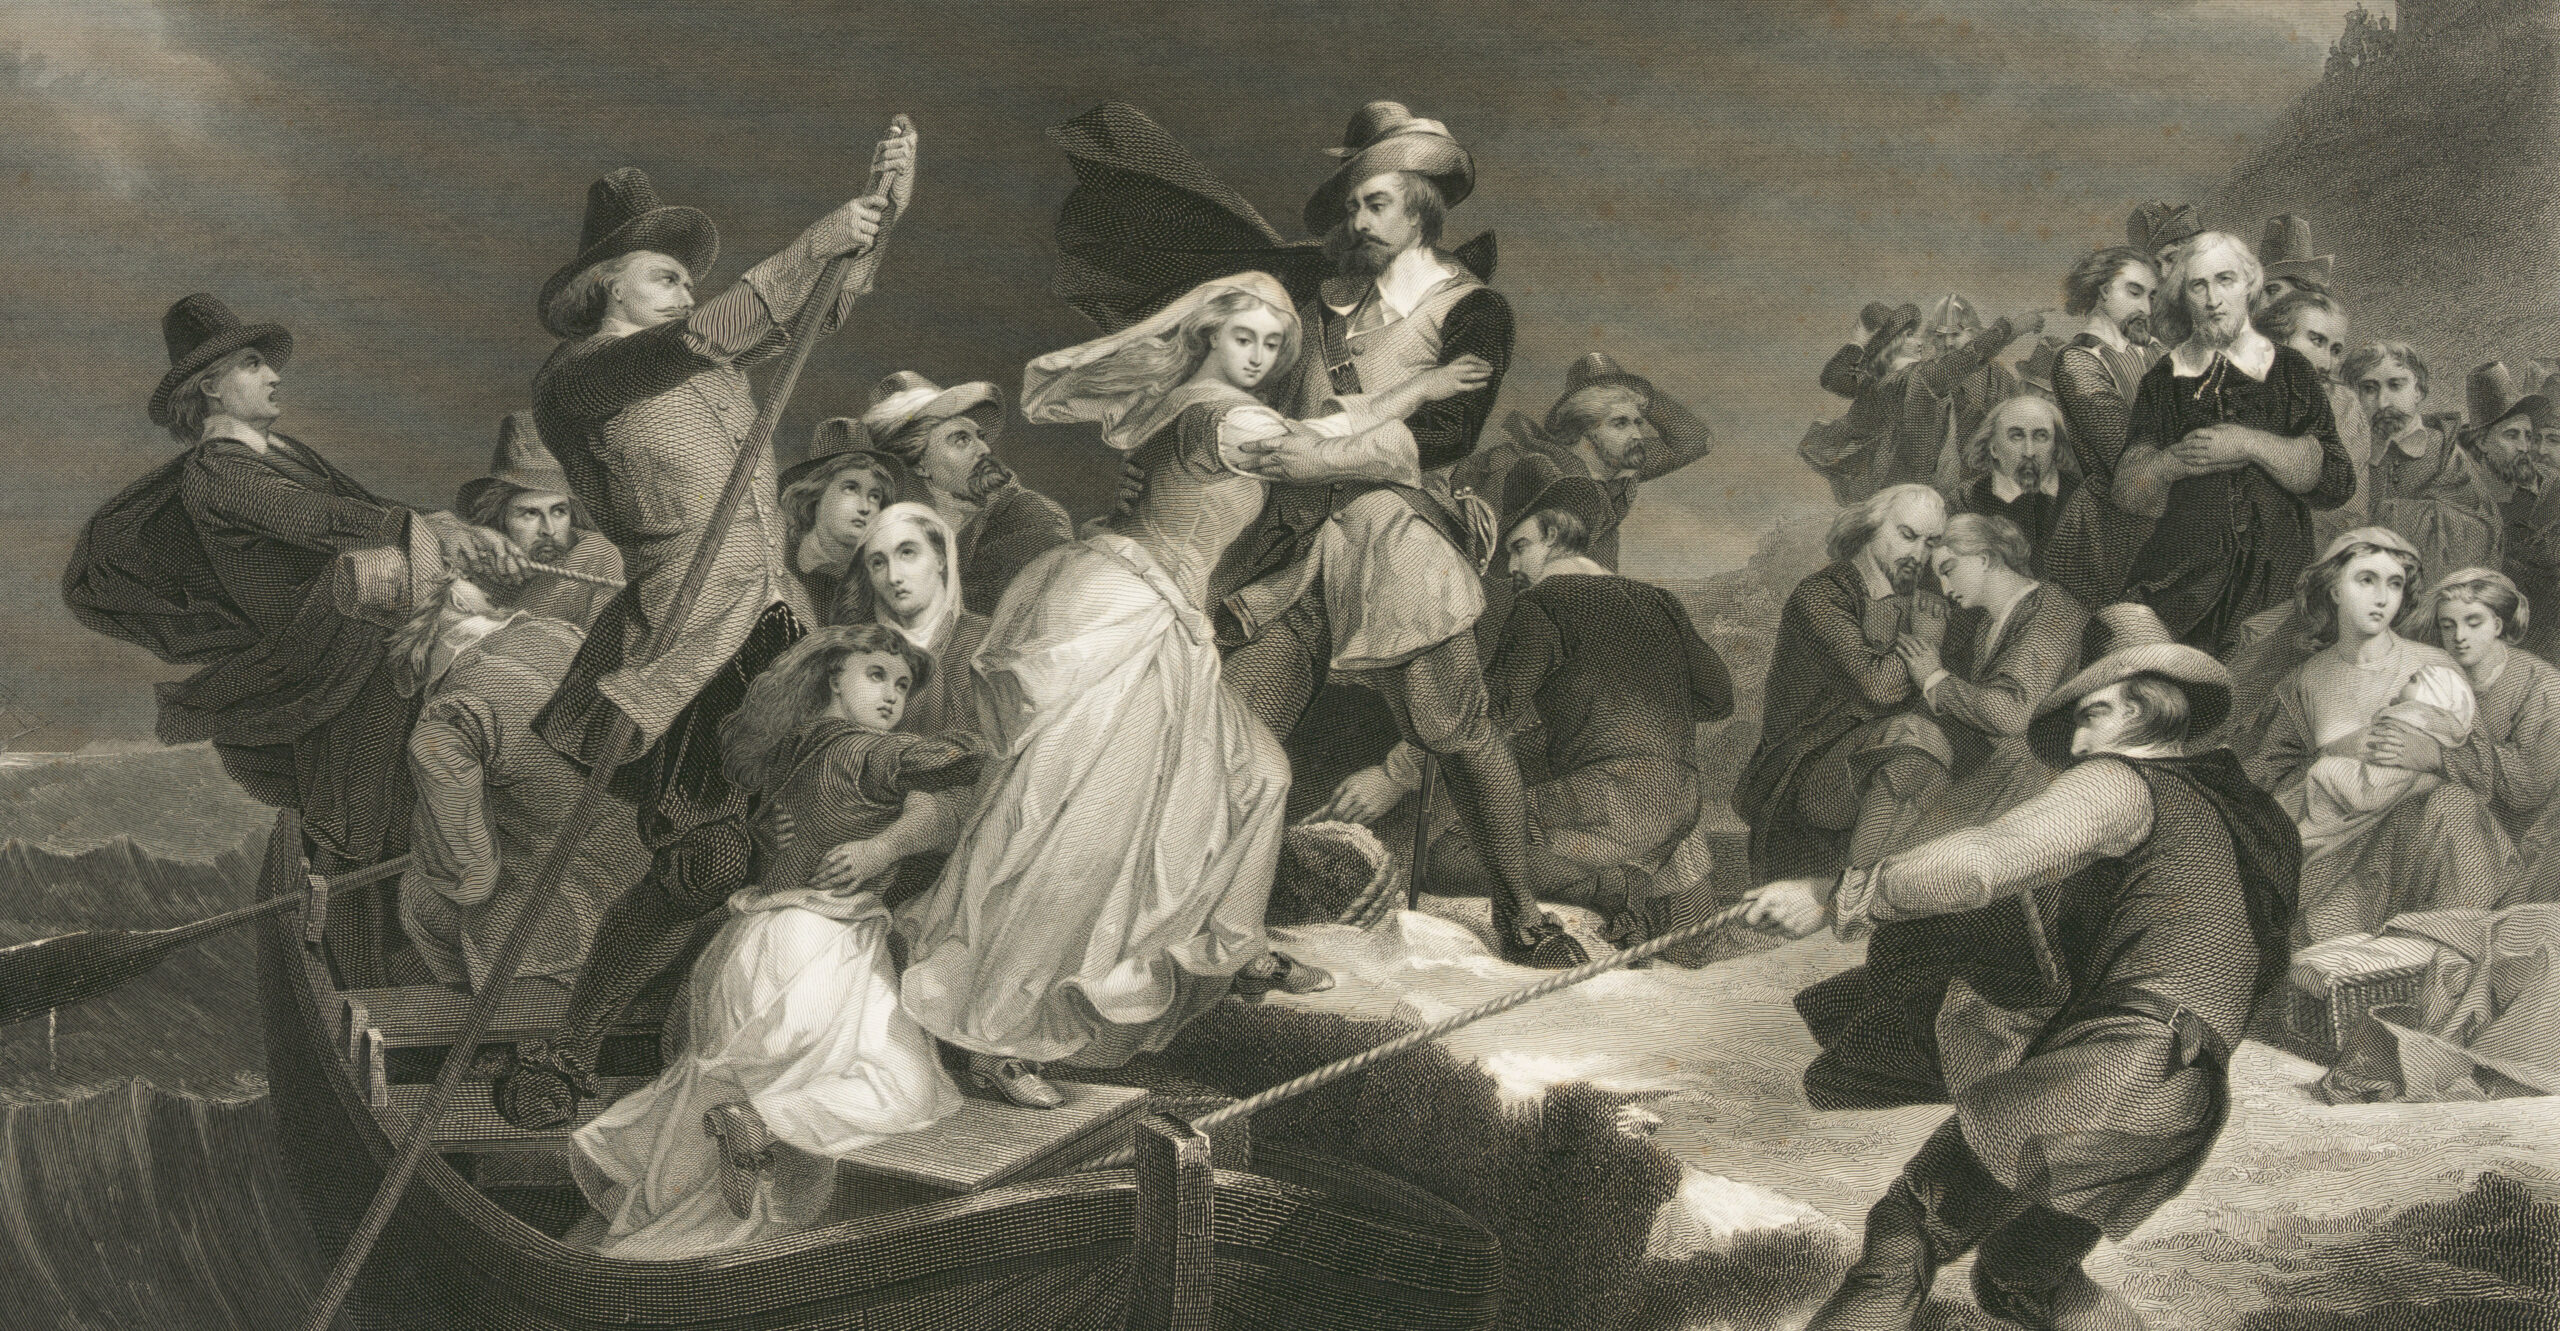 The Mayflower Compact and the Roots of Economic Freedom and Private Property